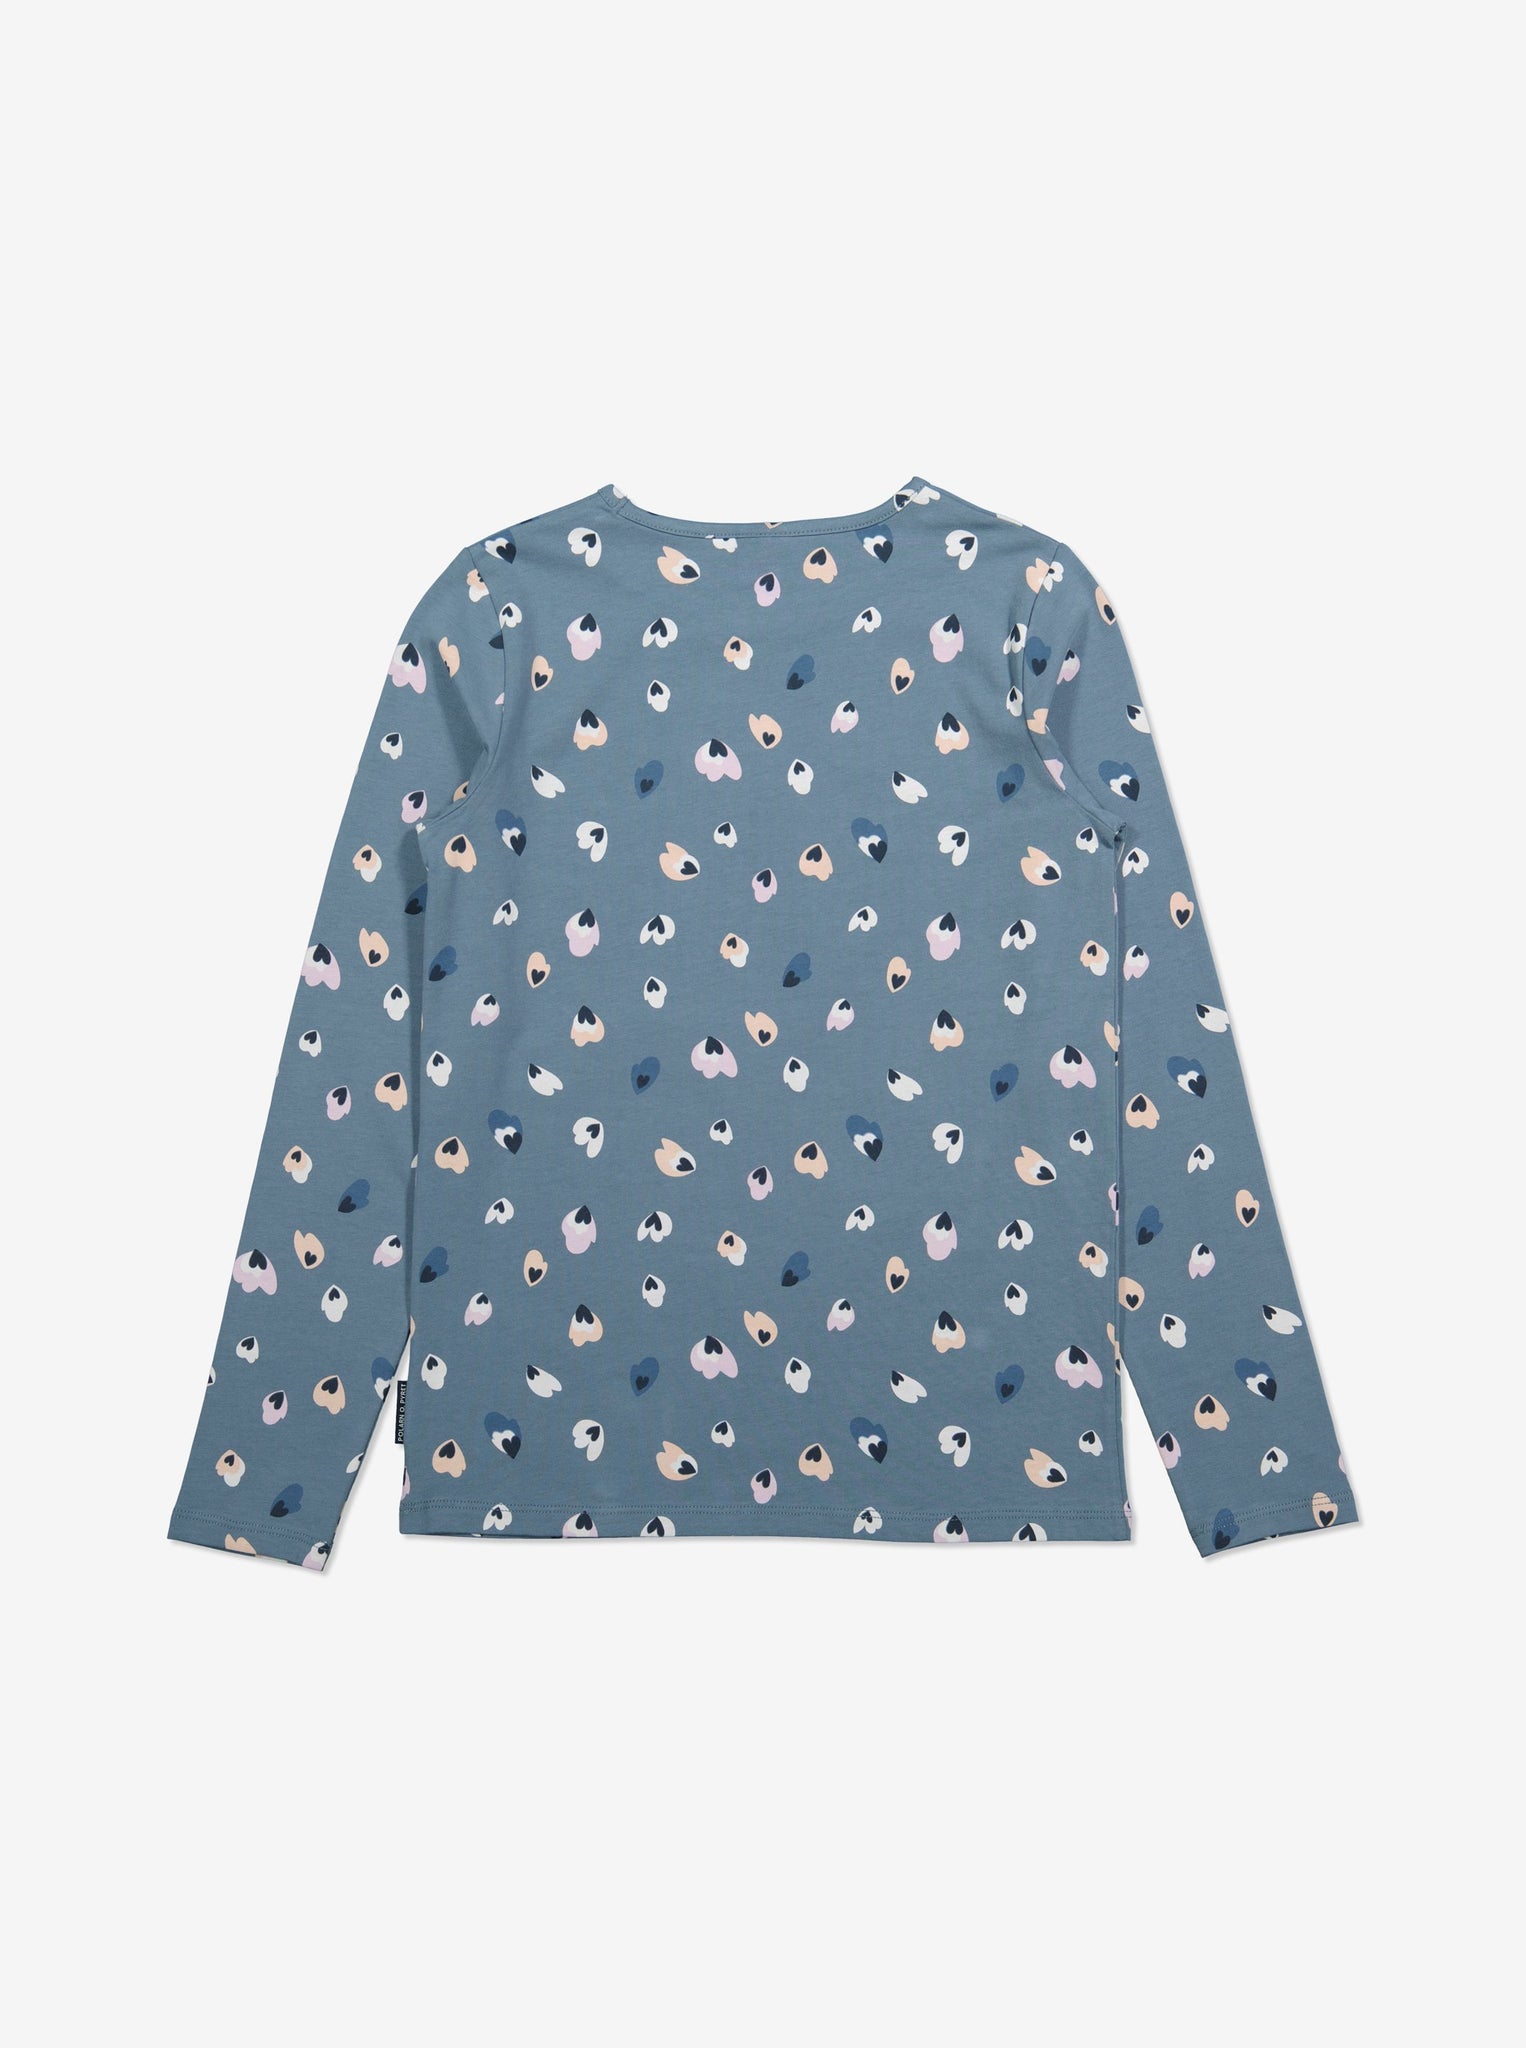  Blue Heart Print Girls Top from Polarn O. Pyret Kidswear. Made from soft organic cotton.